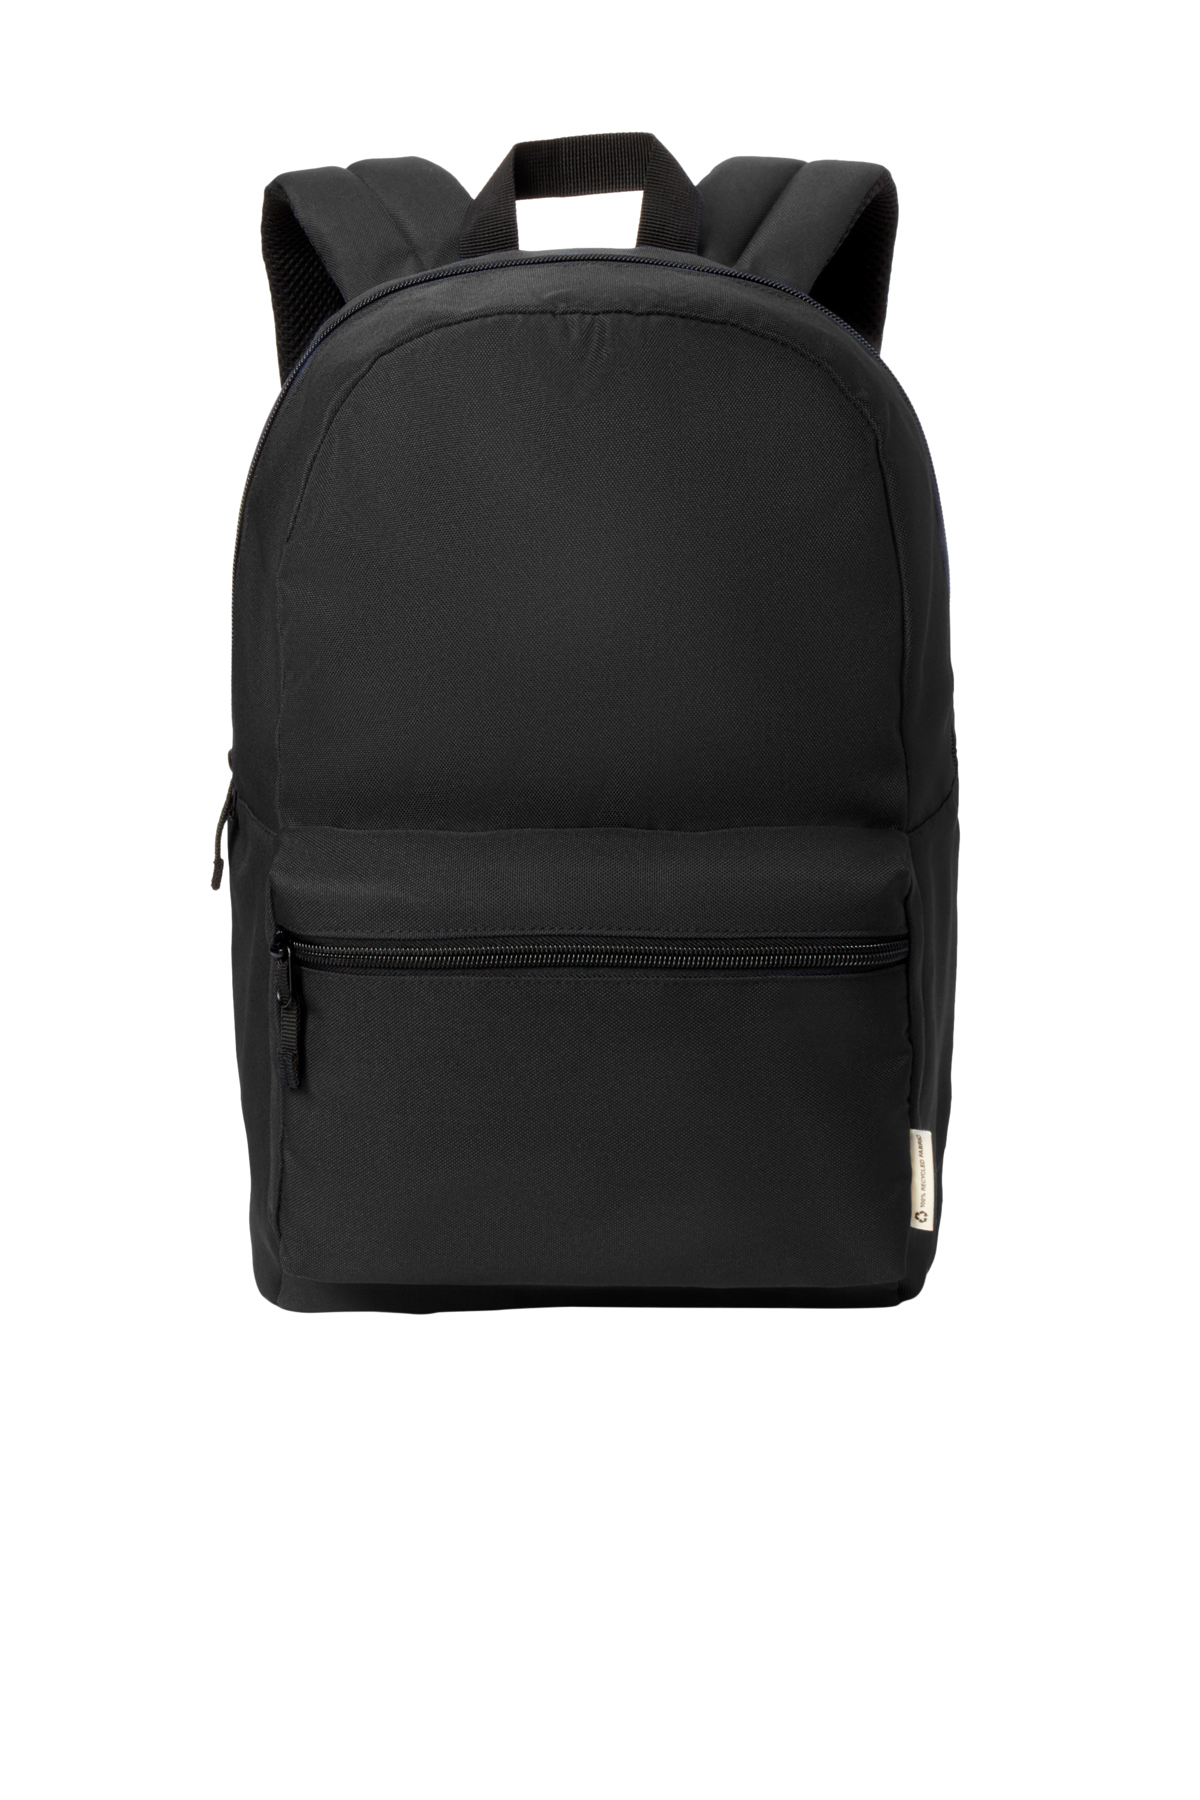 Port Authority C-FREE Recycled Backpack | Product | SanMar